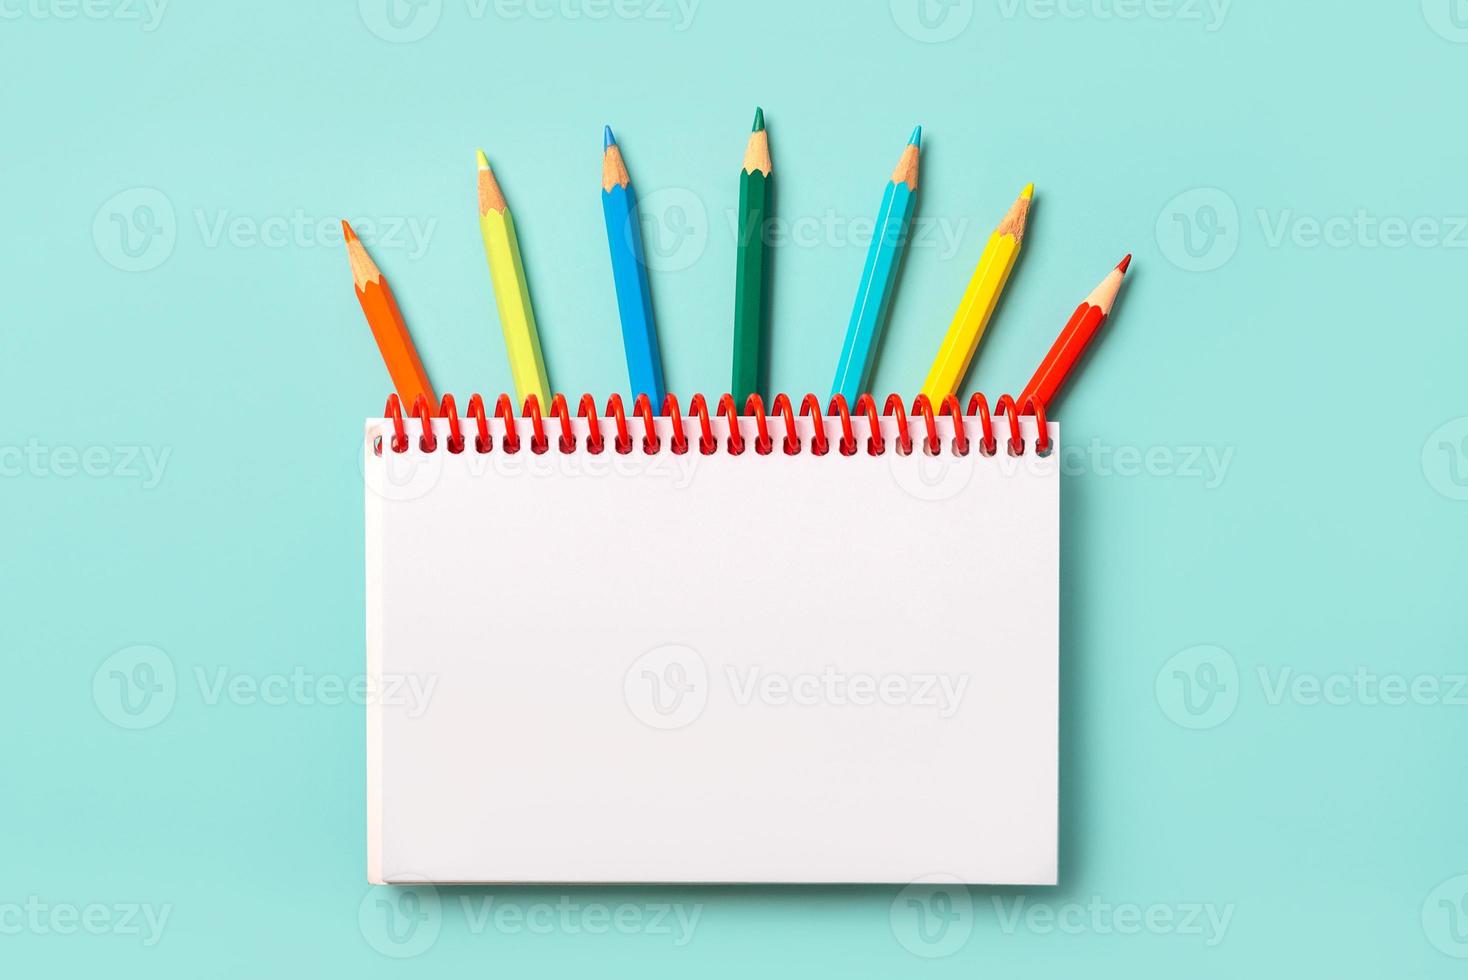 Spiral notebook with colored pencils and with copy space for your image or text photo